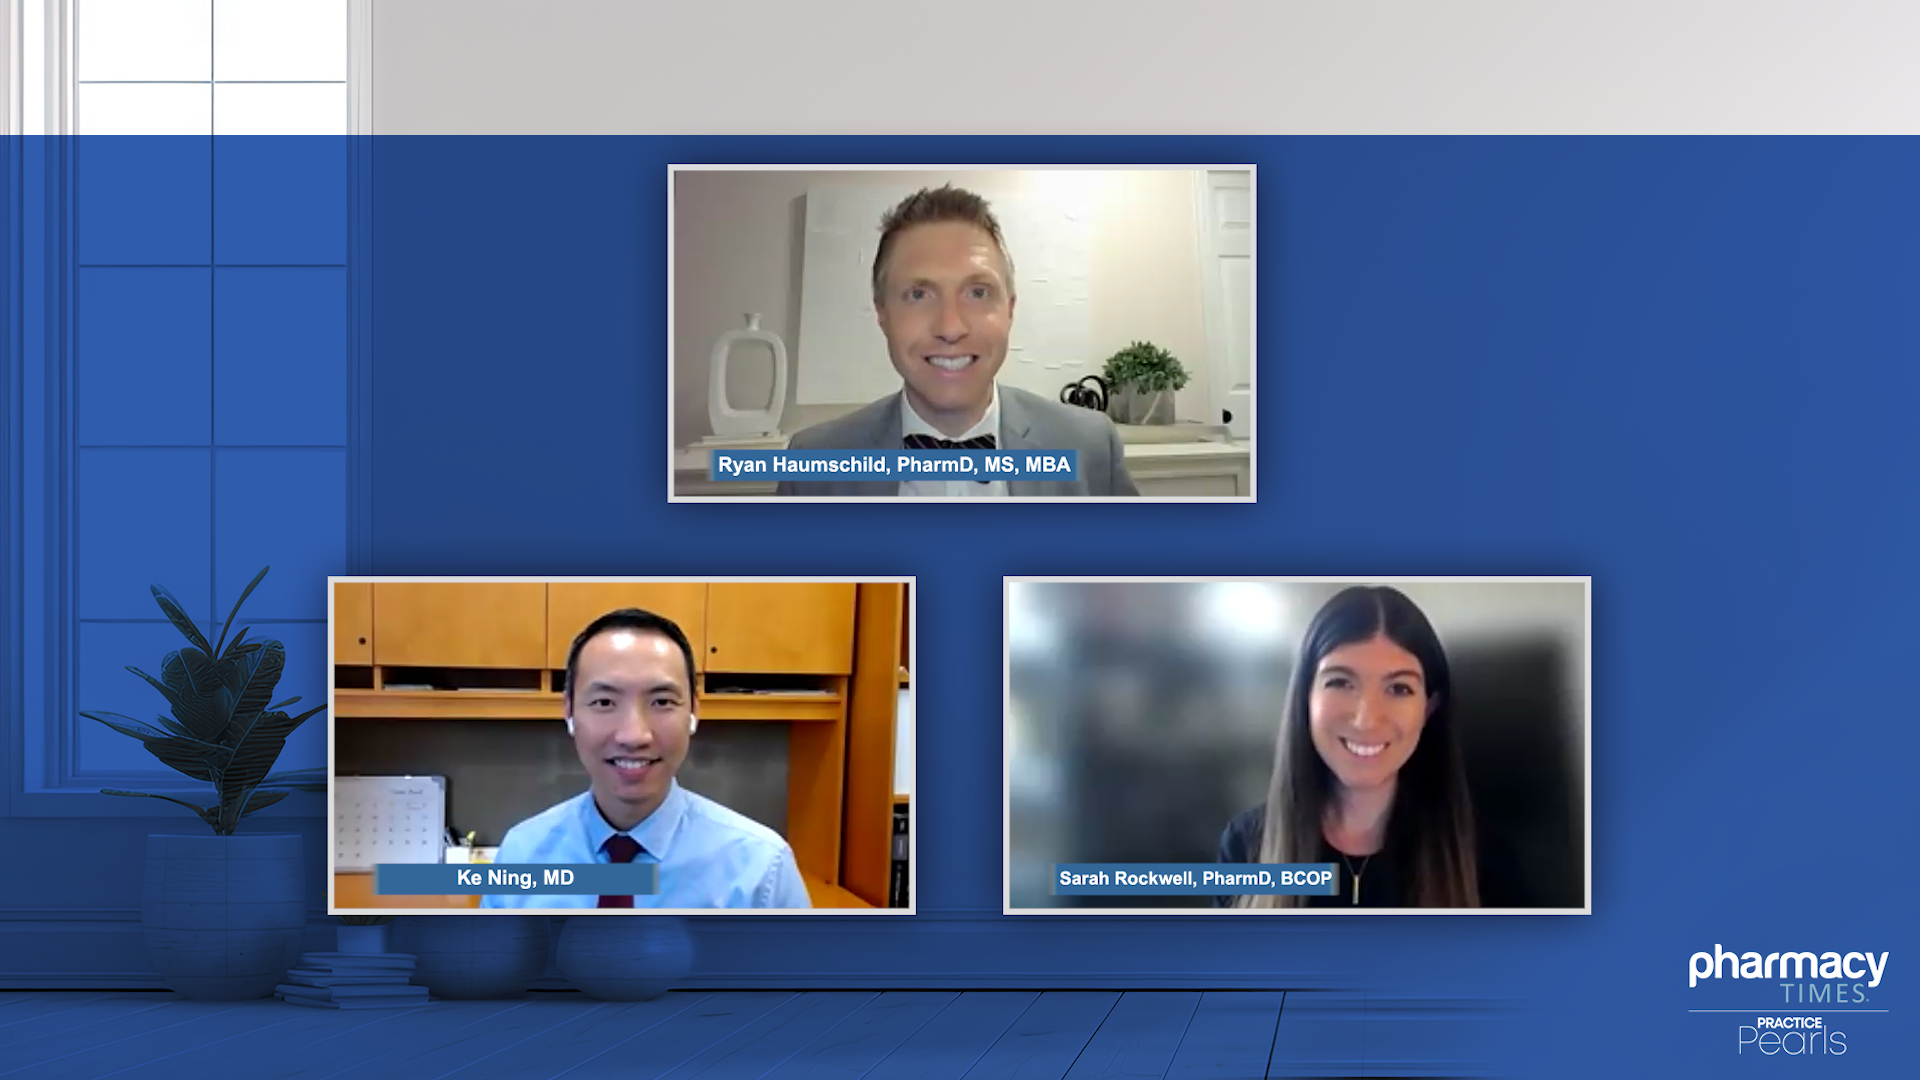 A panel of 3 experts on multiple myeloma